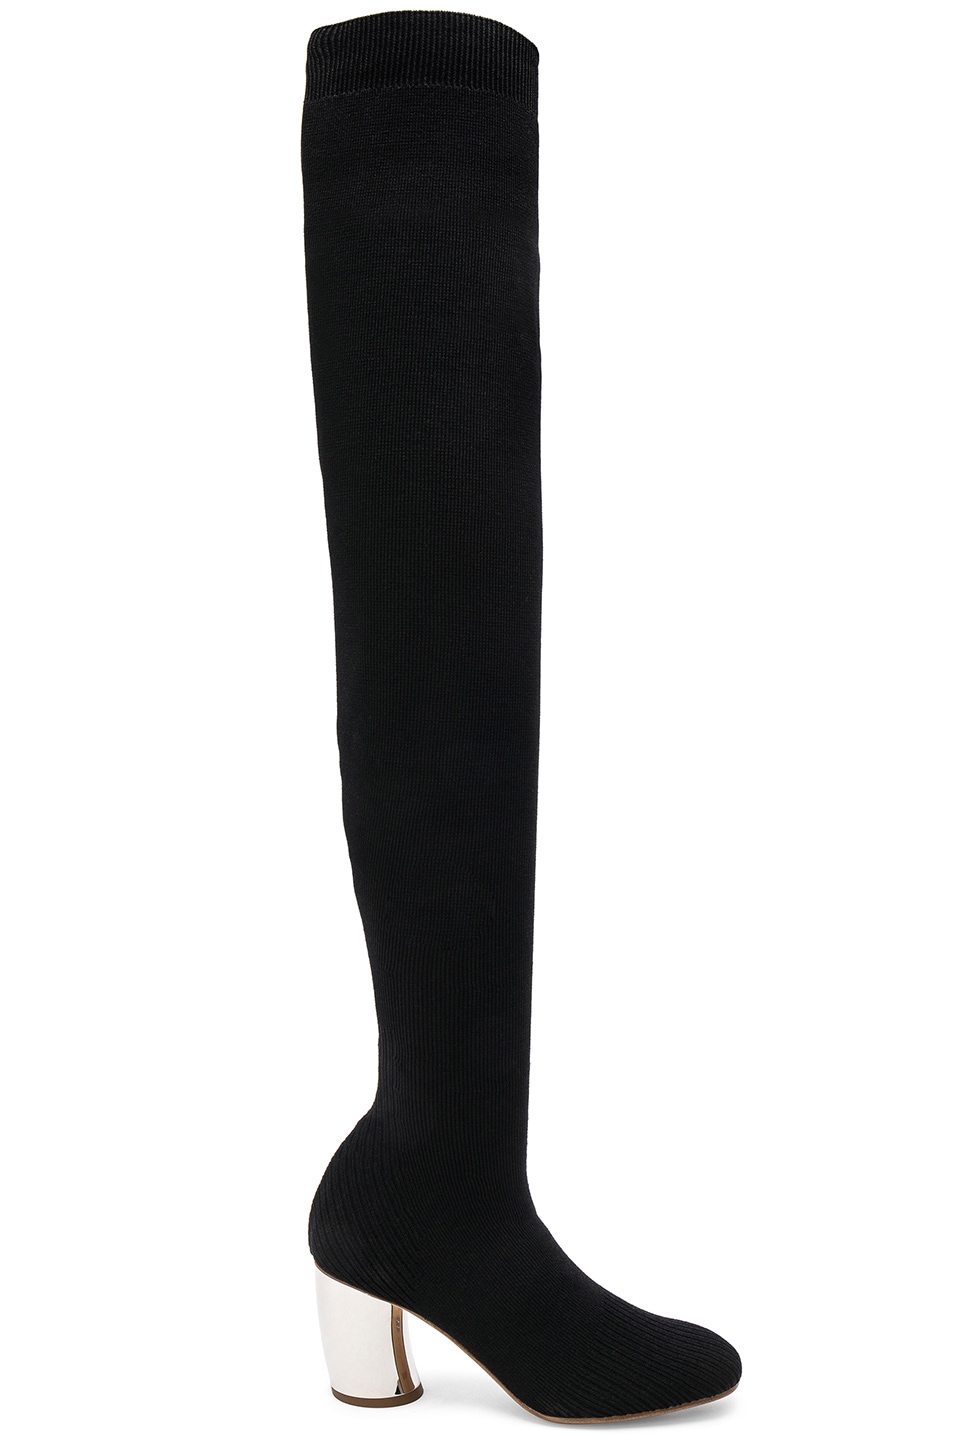 Image 1 of Proenza Schouler Knit Thigh High Boots in Black & Silver